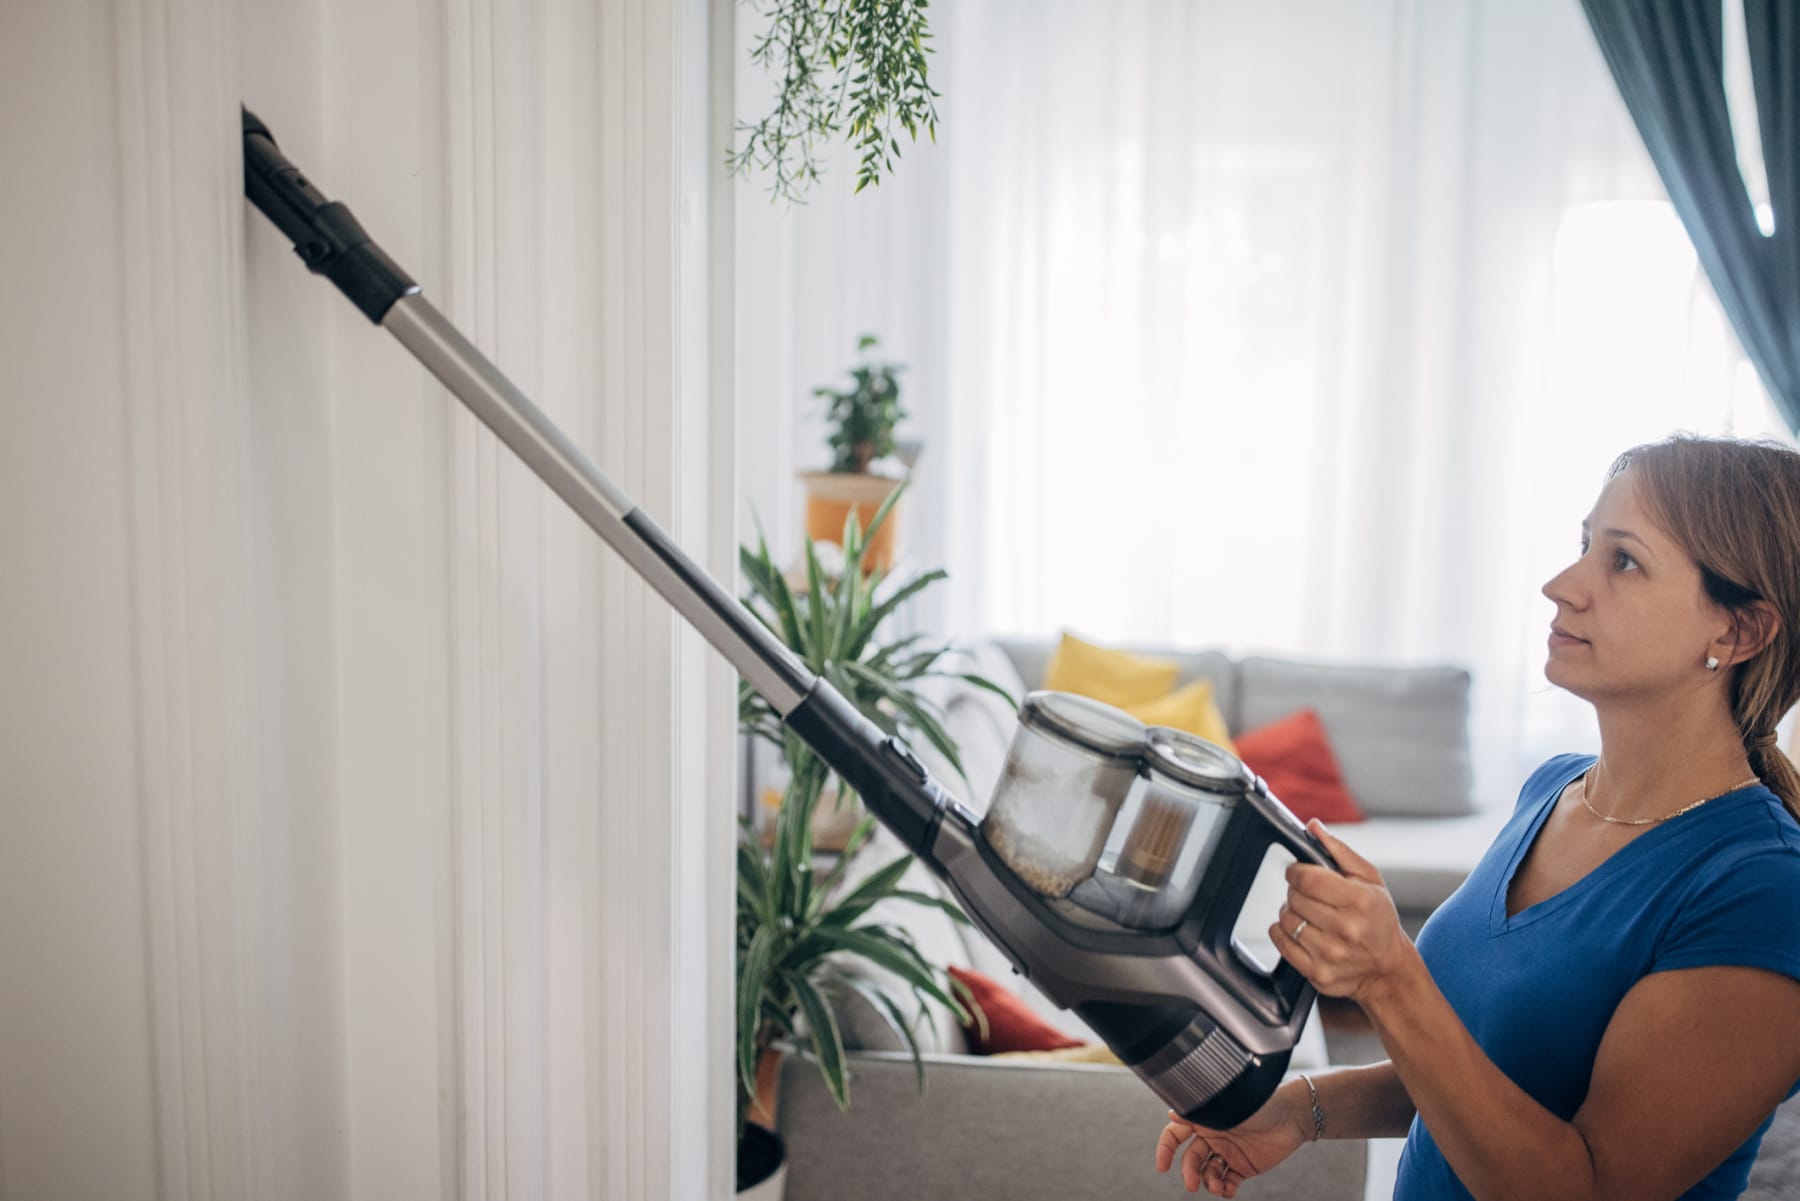 Woman cleans home with cordless stick vacuum.